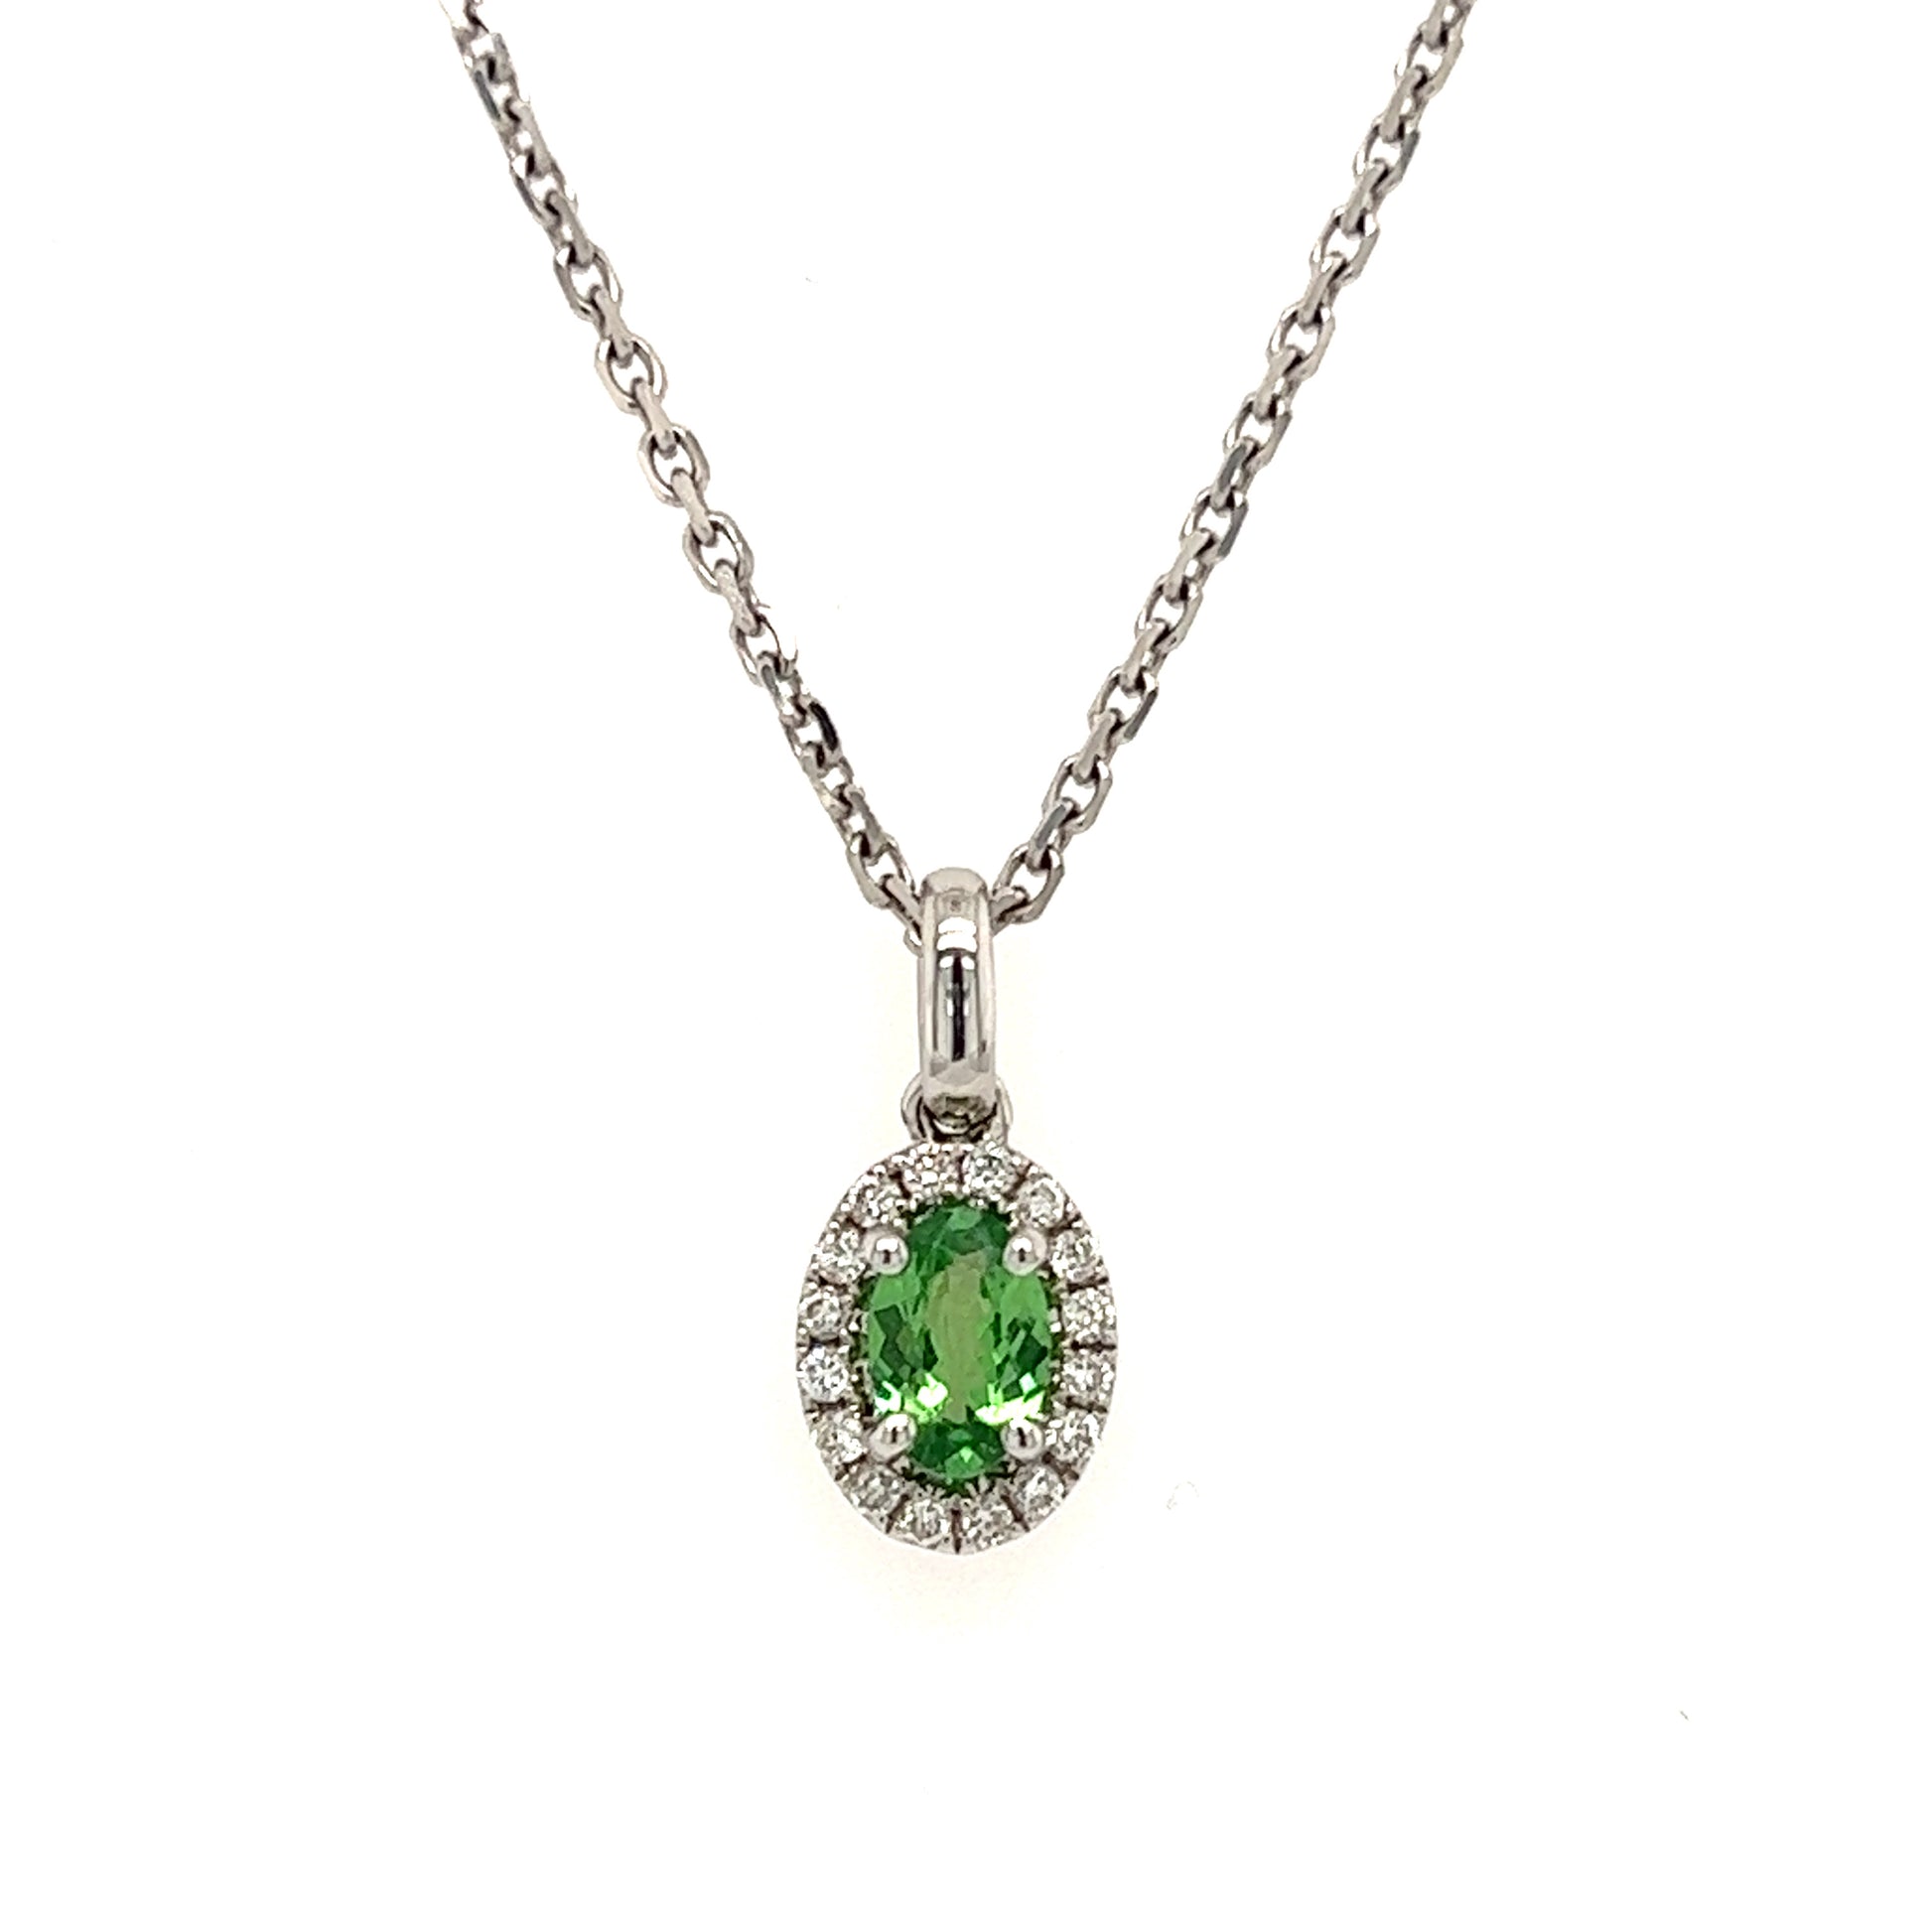 Oval Tsavorite Pendant with Diamond Halo in 14K White Gold Pendant and Chain Front View